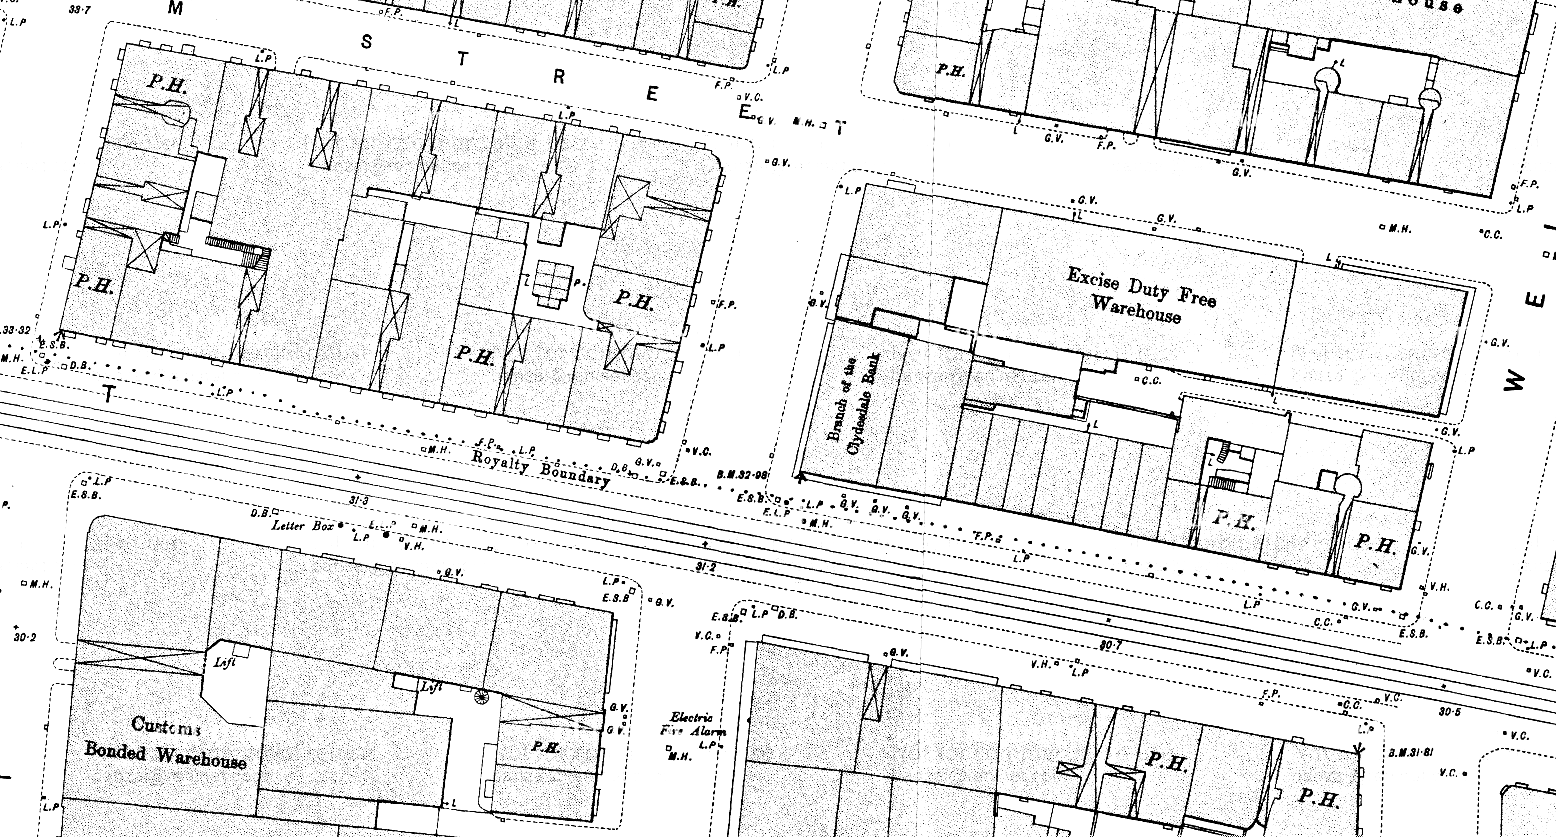 A4--West Campbell Street at Argyle Street--1895 OS map extract 1-500 scale.png